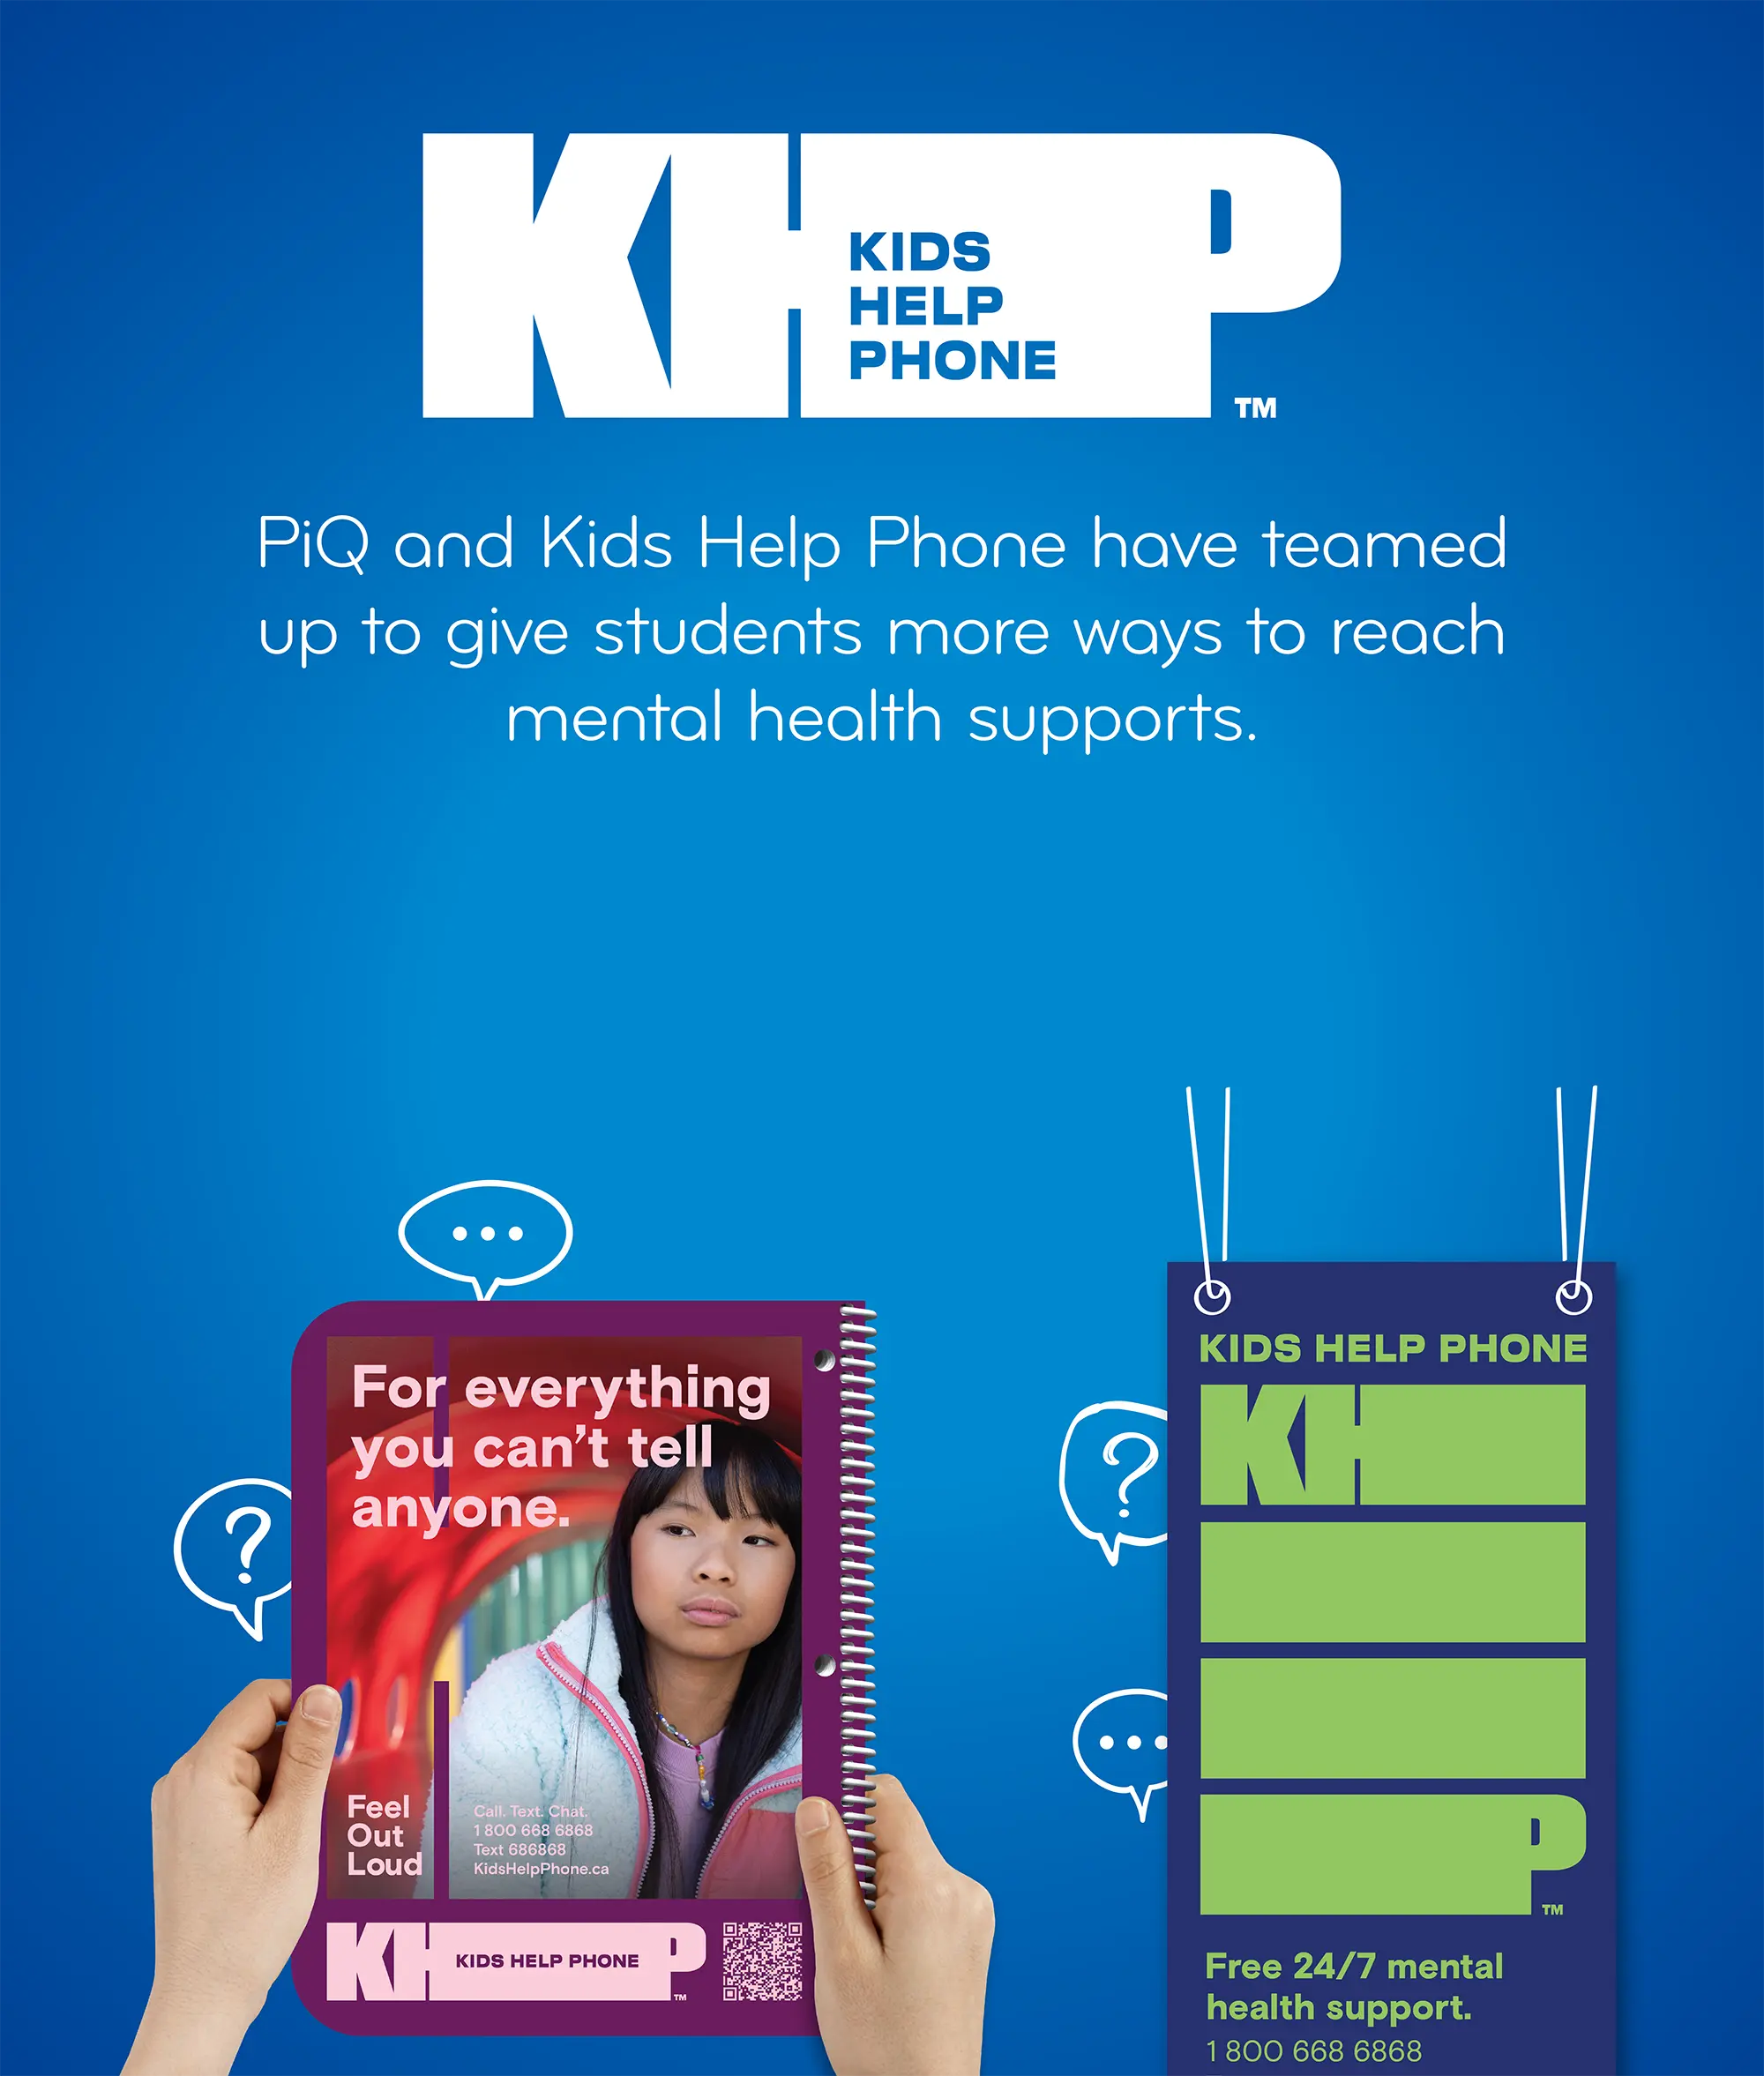 PiQ and Kids Help Phone have teamed up